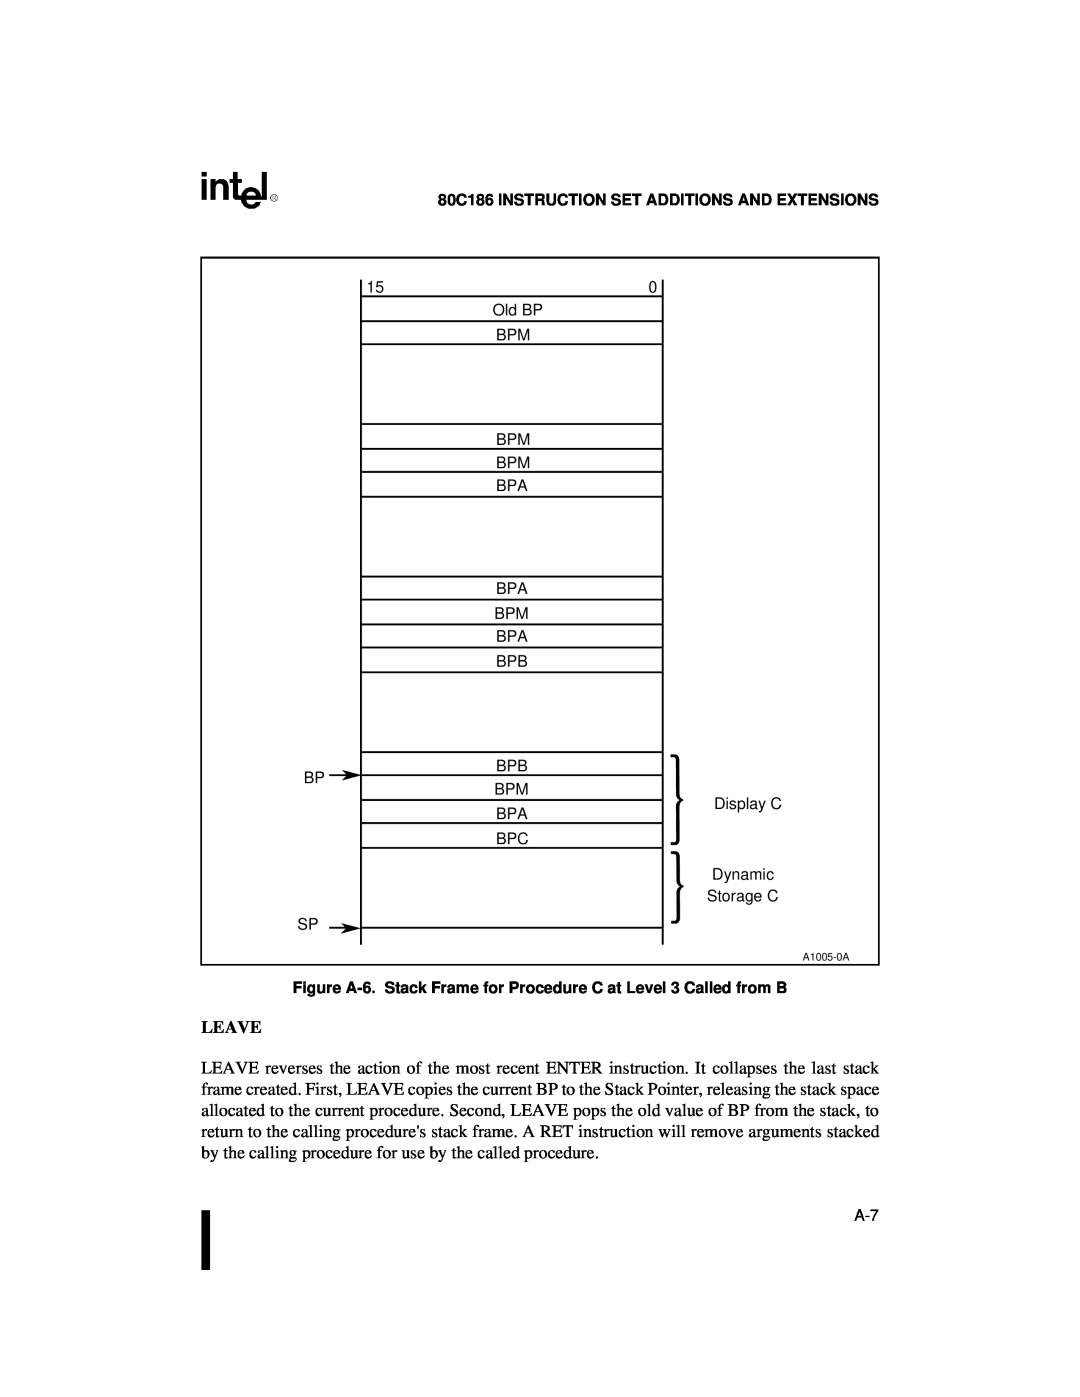 Intel 80C188XL, 80C186XL user manual Leave, 80C186 INSTRUCTION SET ADDITIONS AND EXTENSIONS 